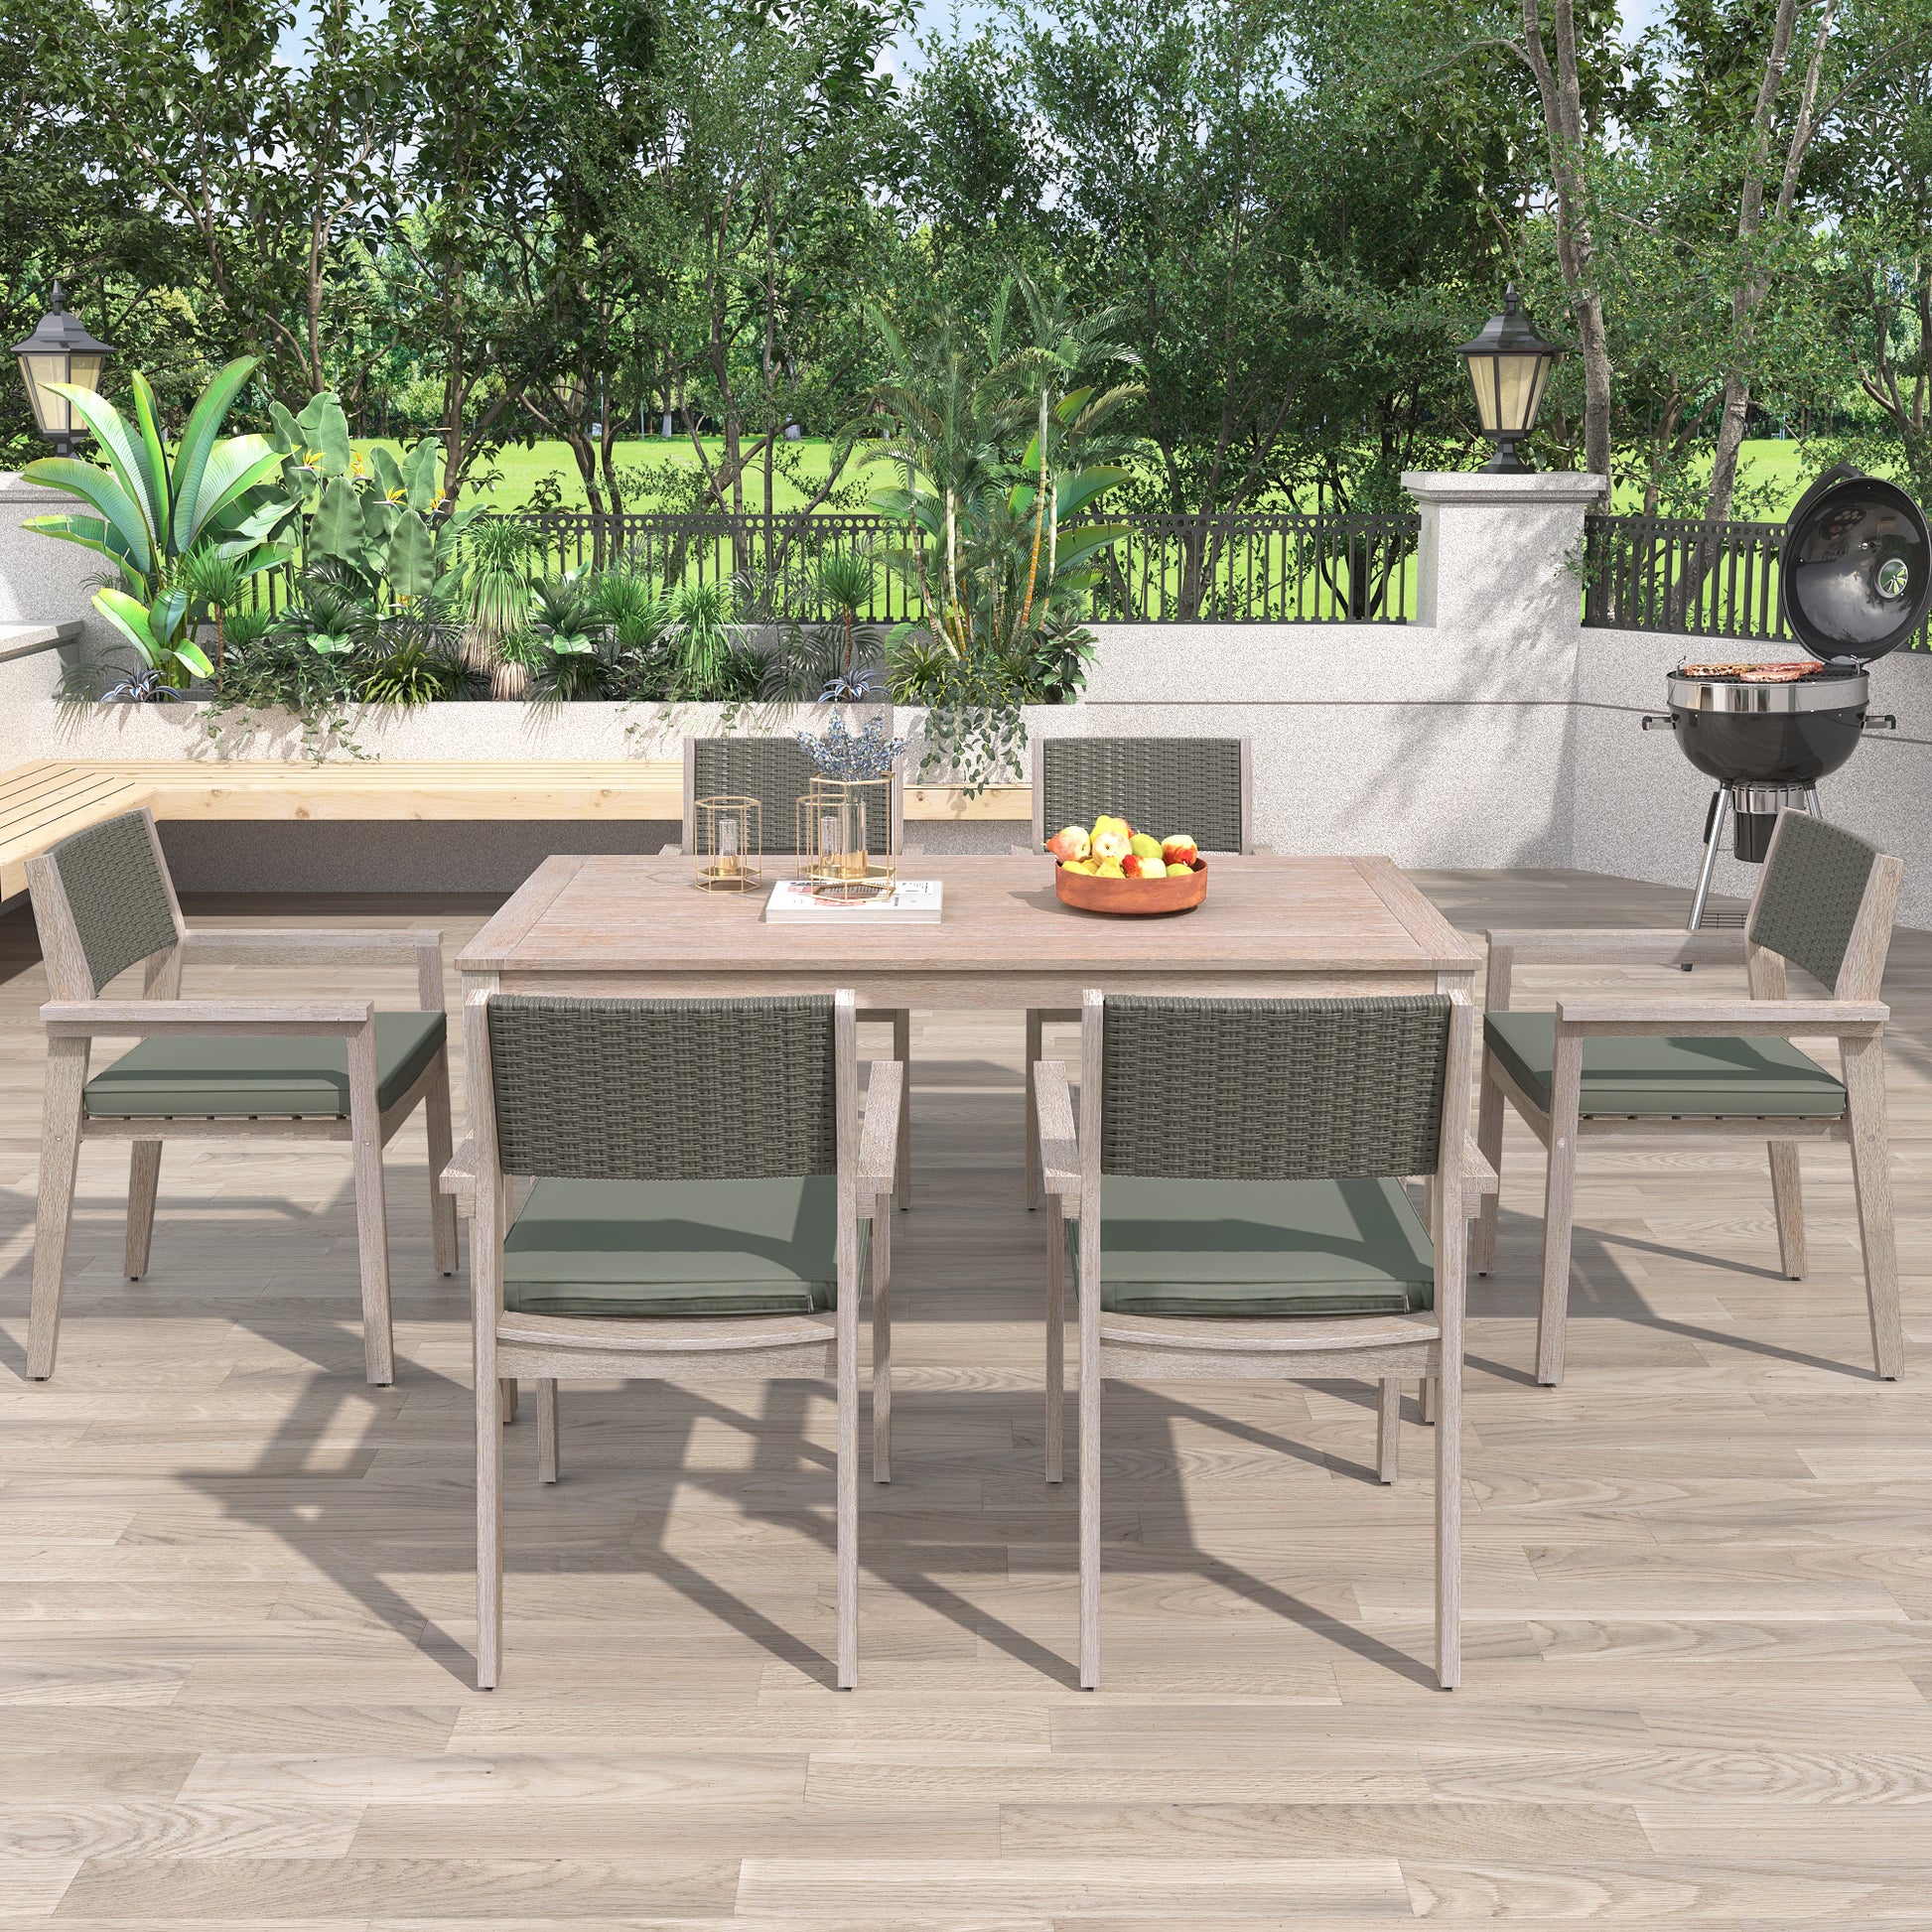 Outdoor Dining Set Patio Dining table and Chairs with yes-white washed-water resistant frame-water